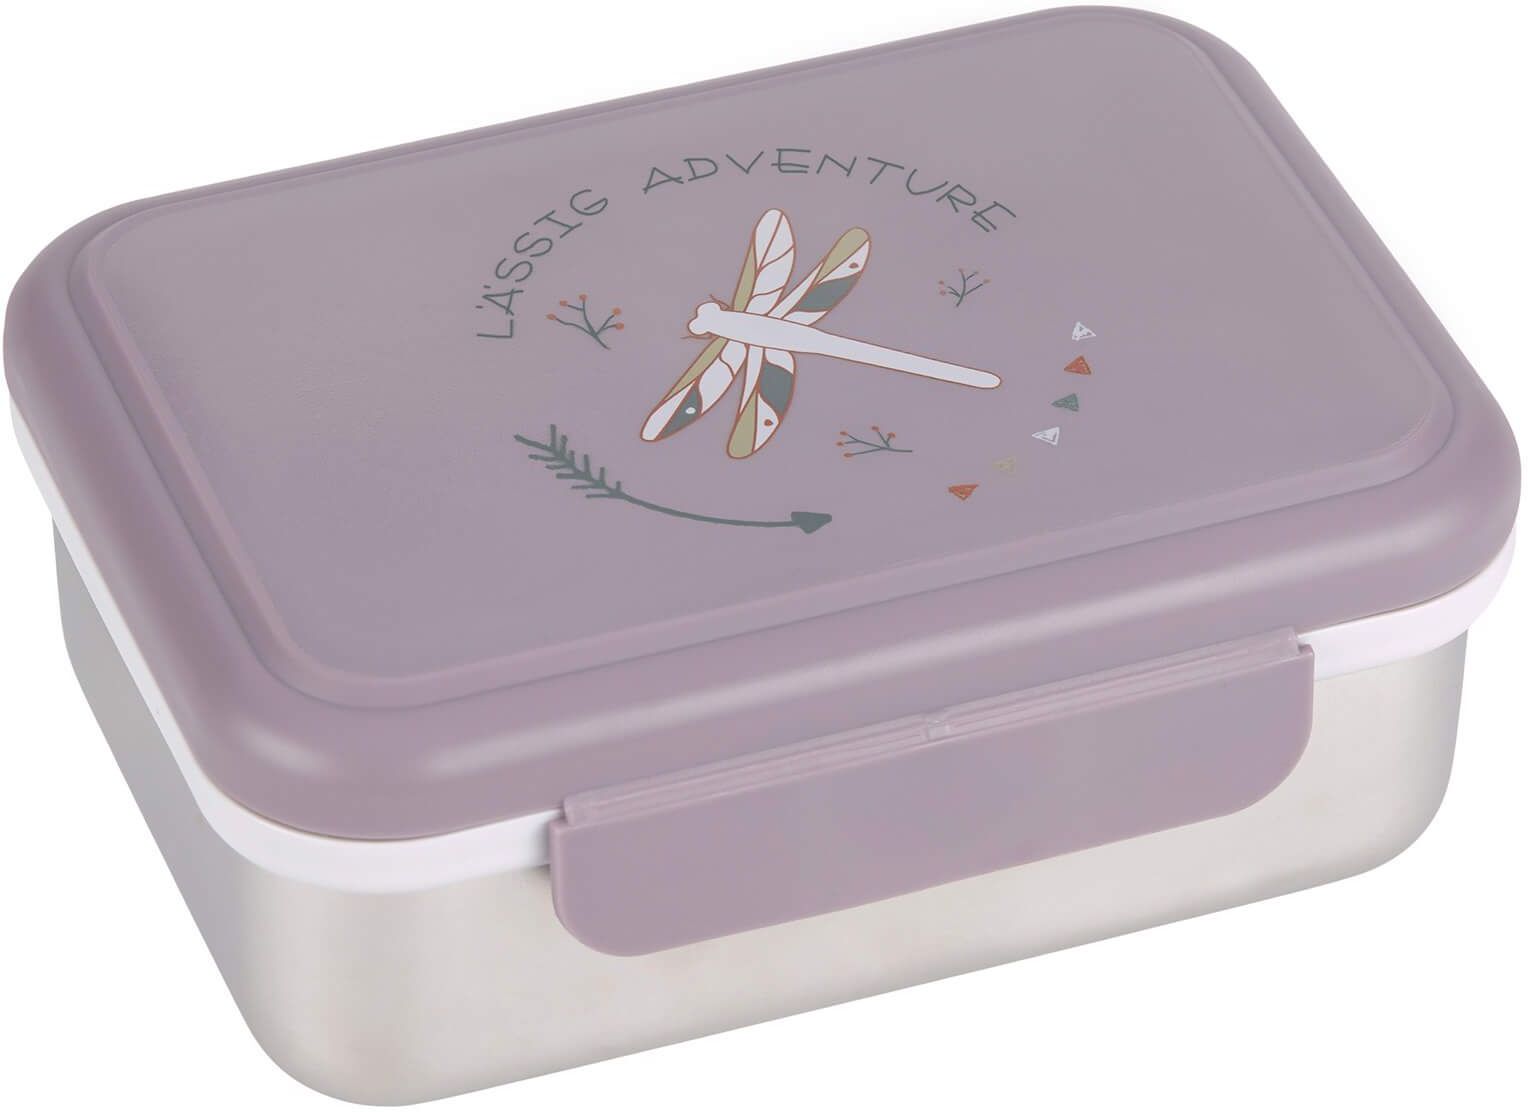 Lassig Adventure Lunchbox Stainless Steel Dragonfly